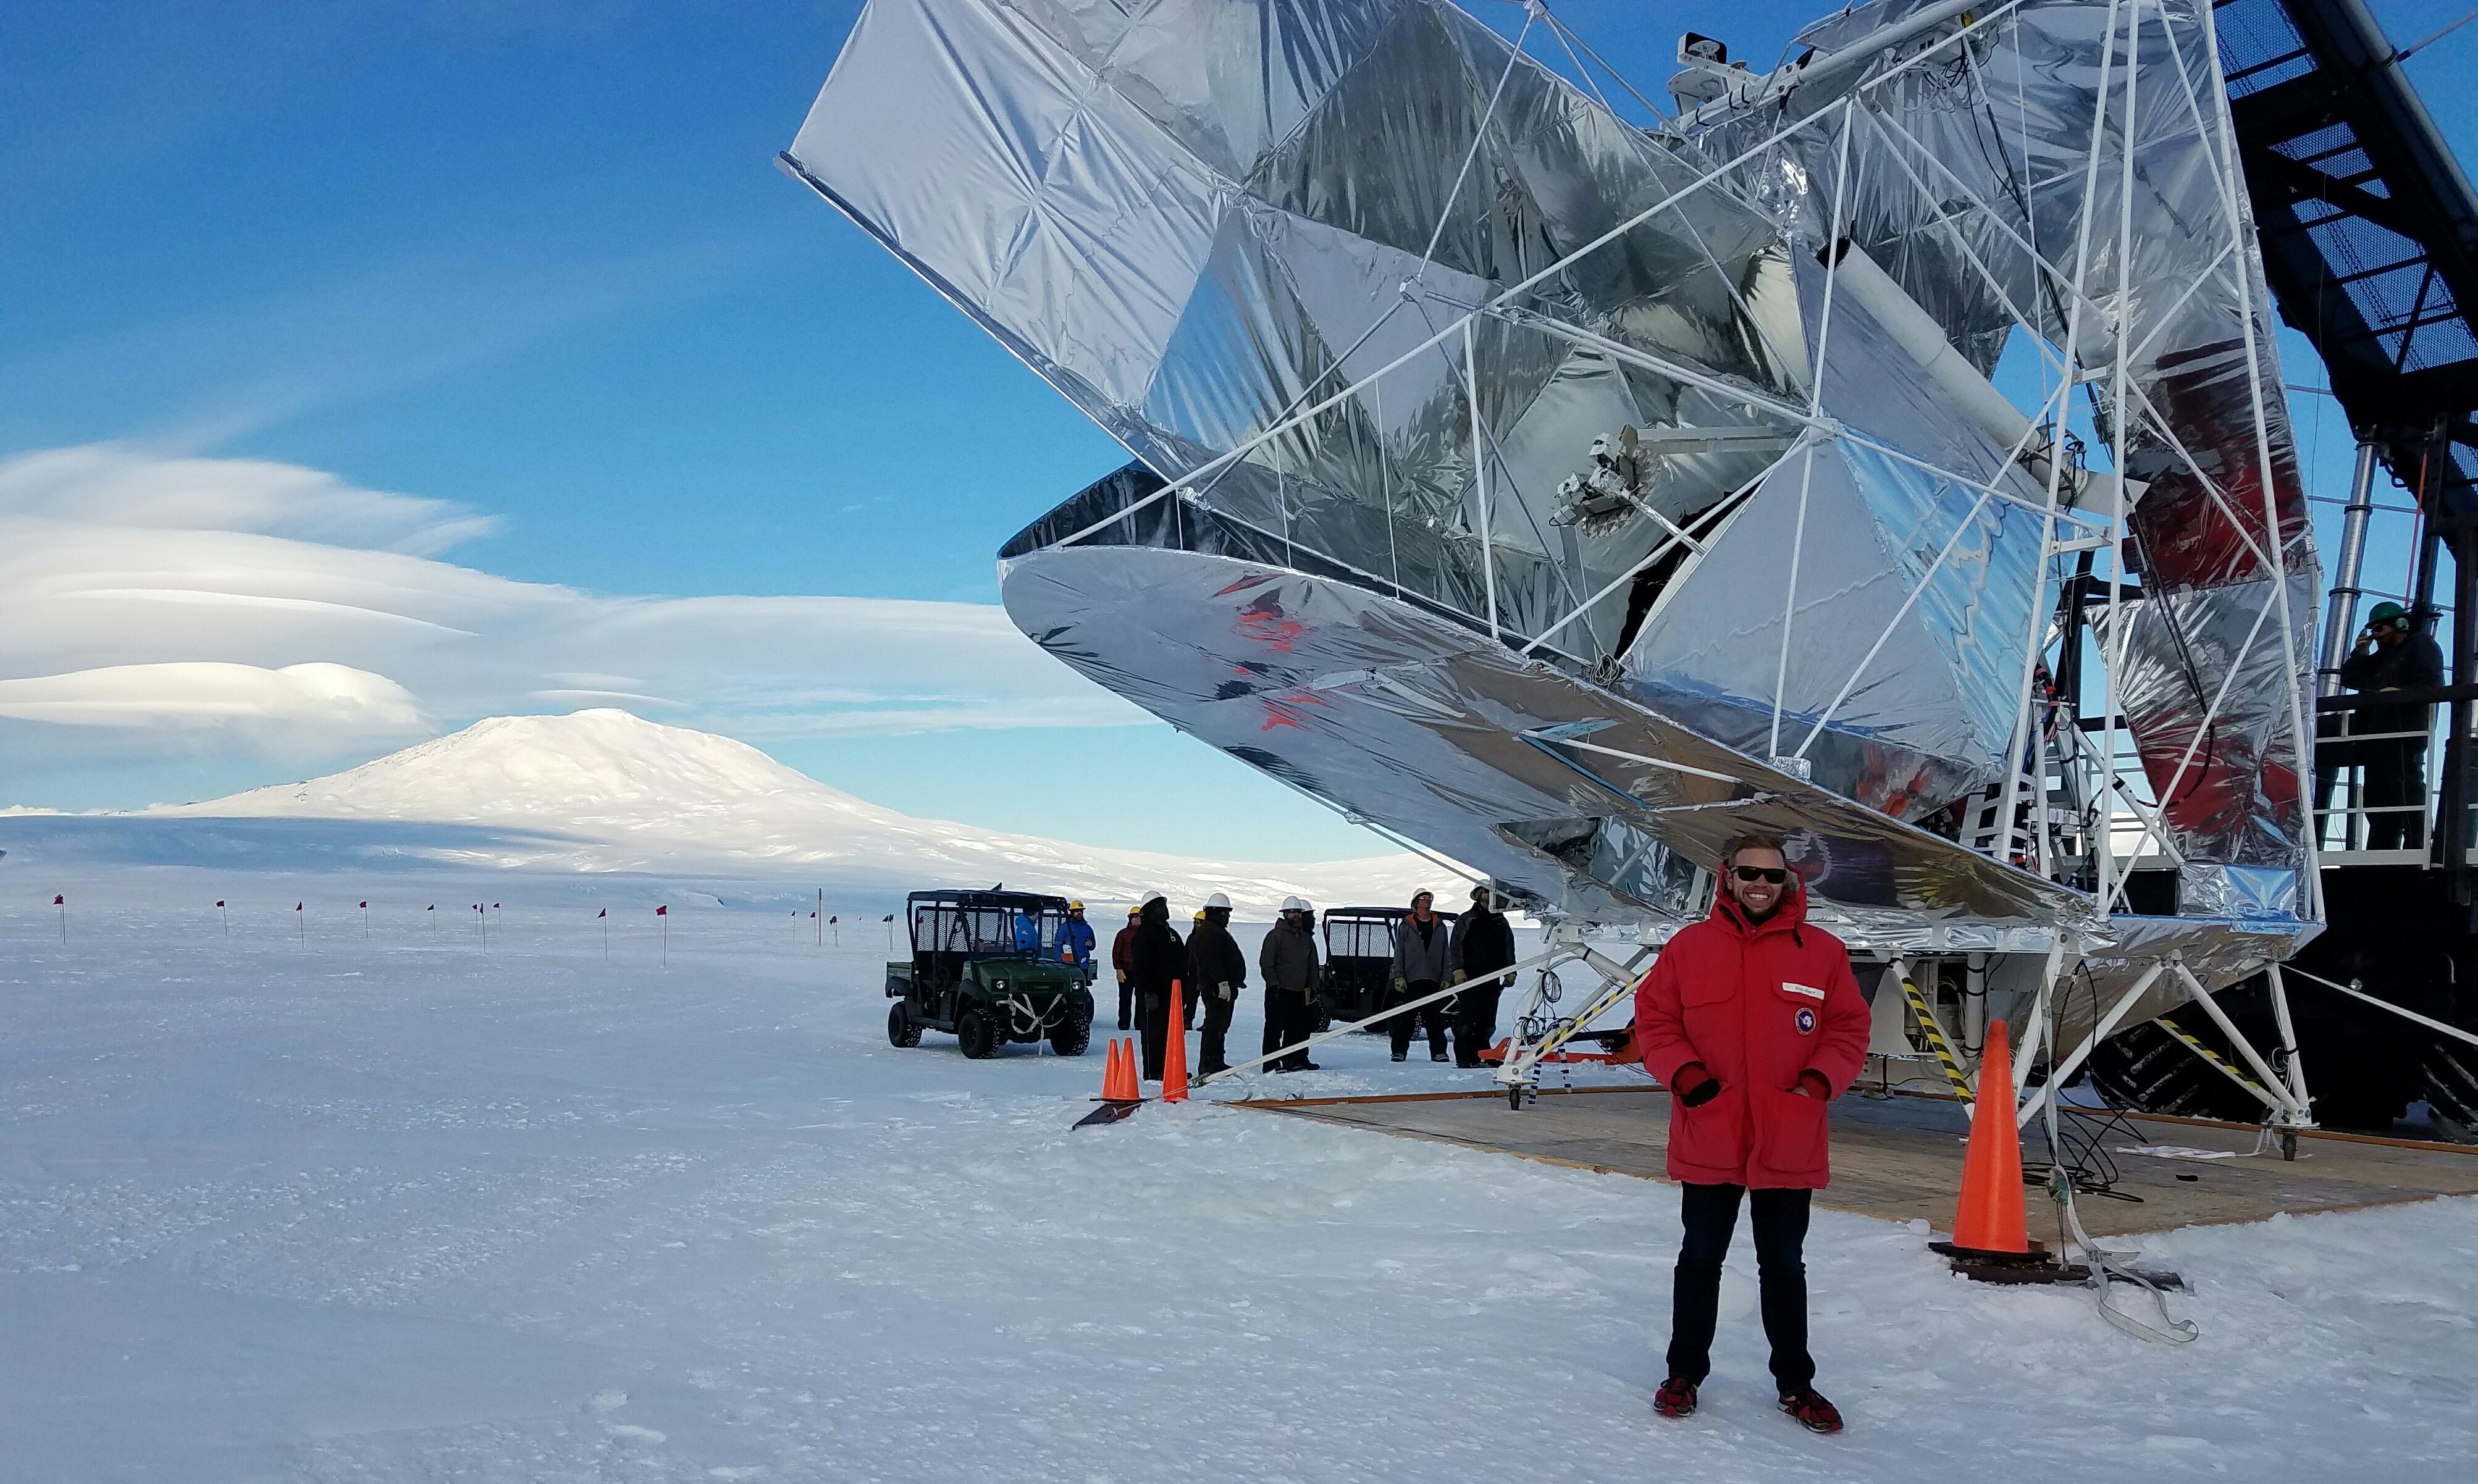 A person in a red parka stands on snow in front of a large metallic balloon structure.